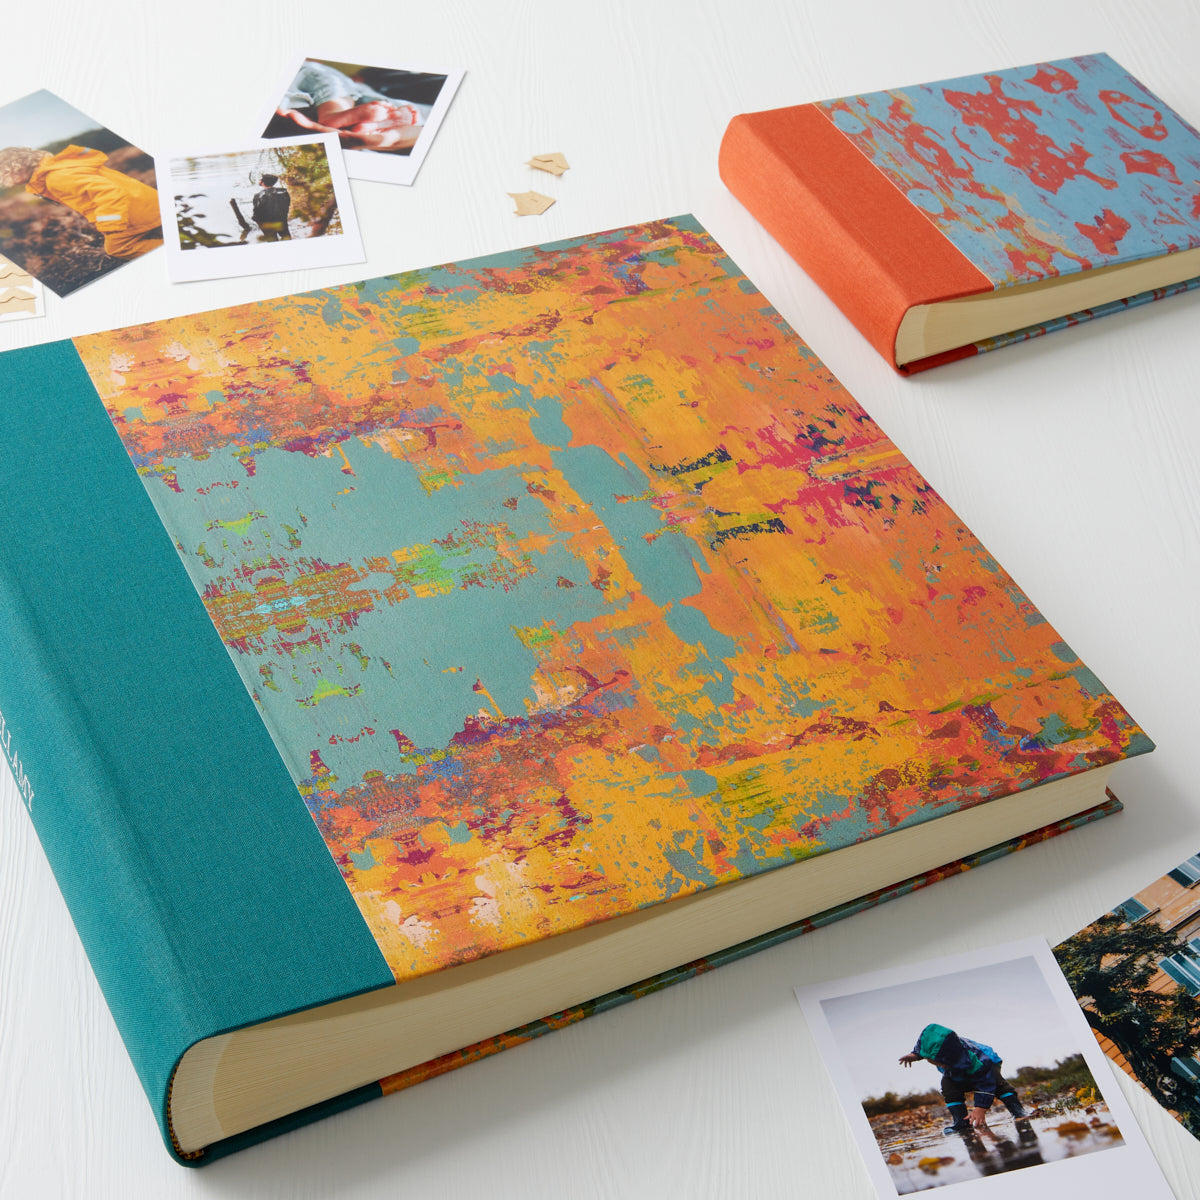 Send Your Own Paper Photo Albums